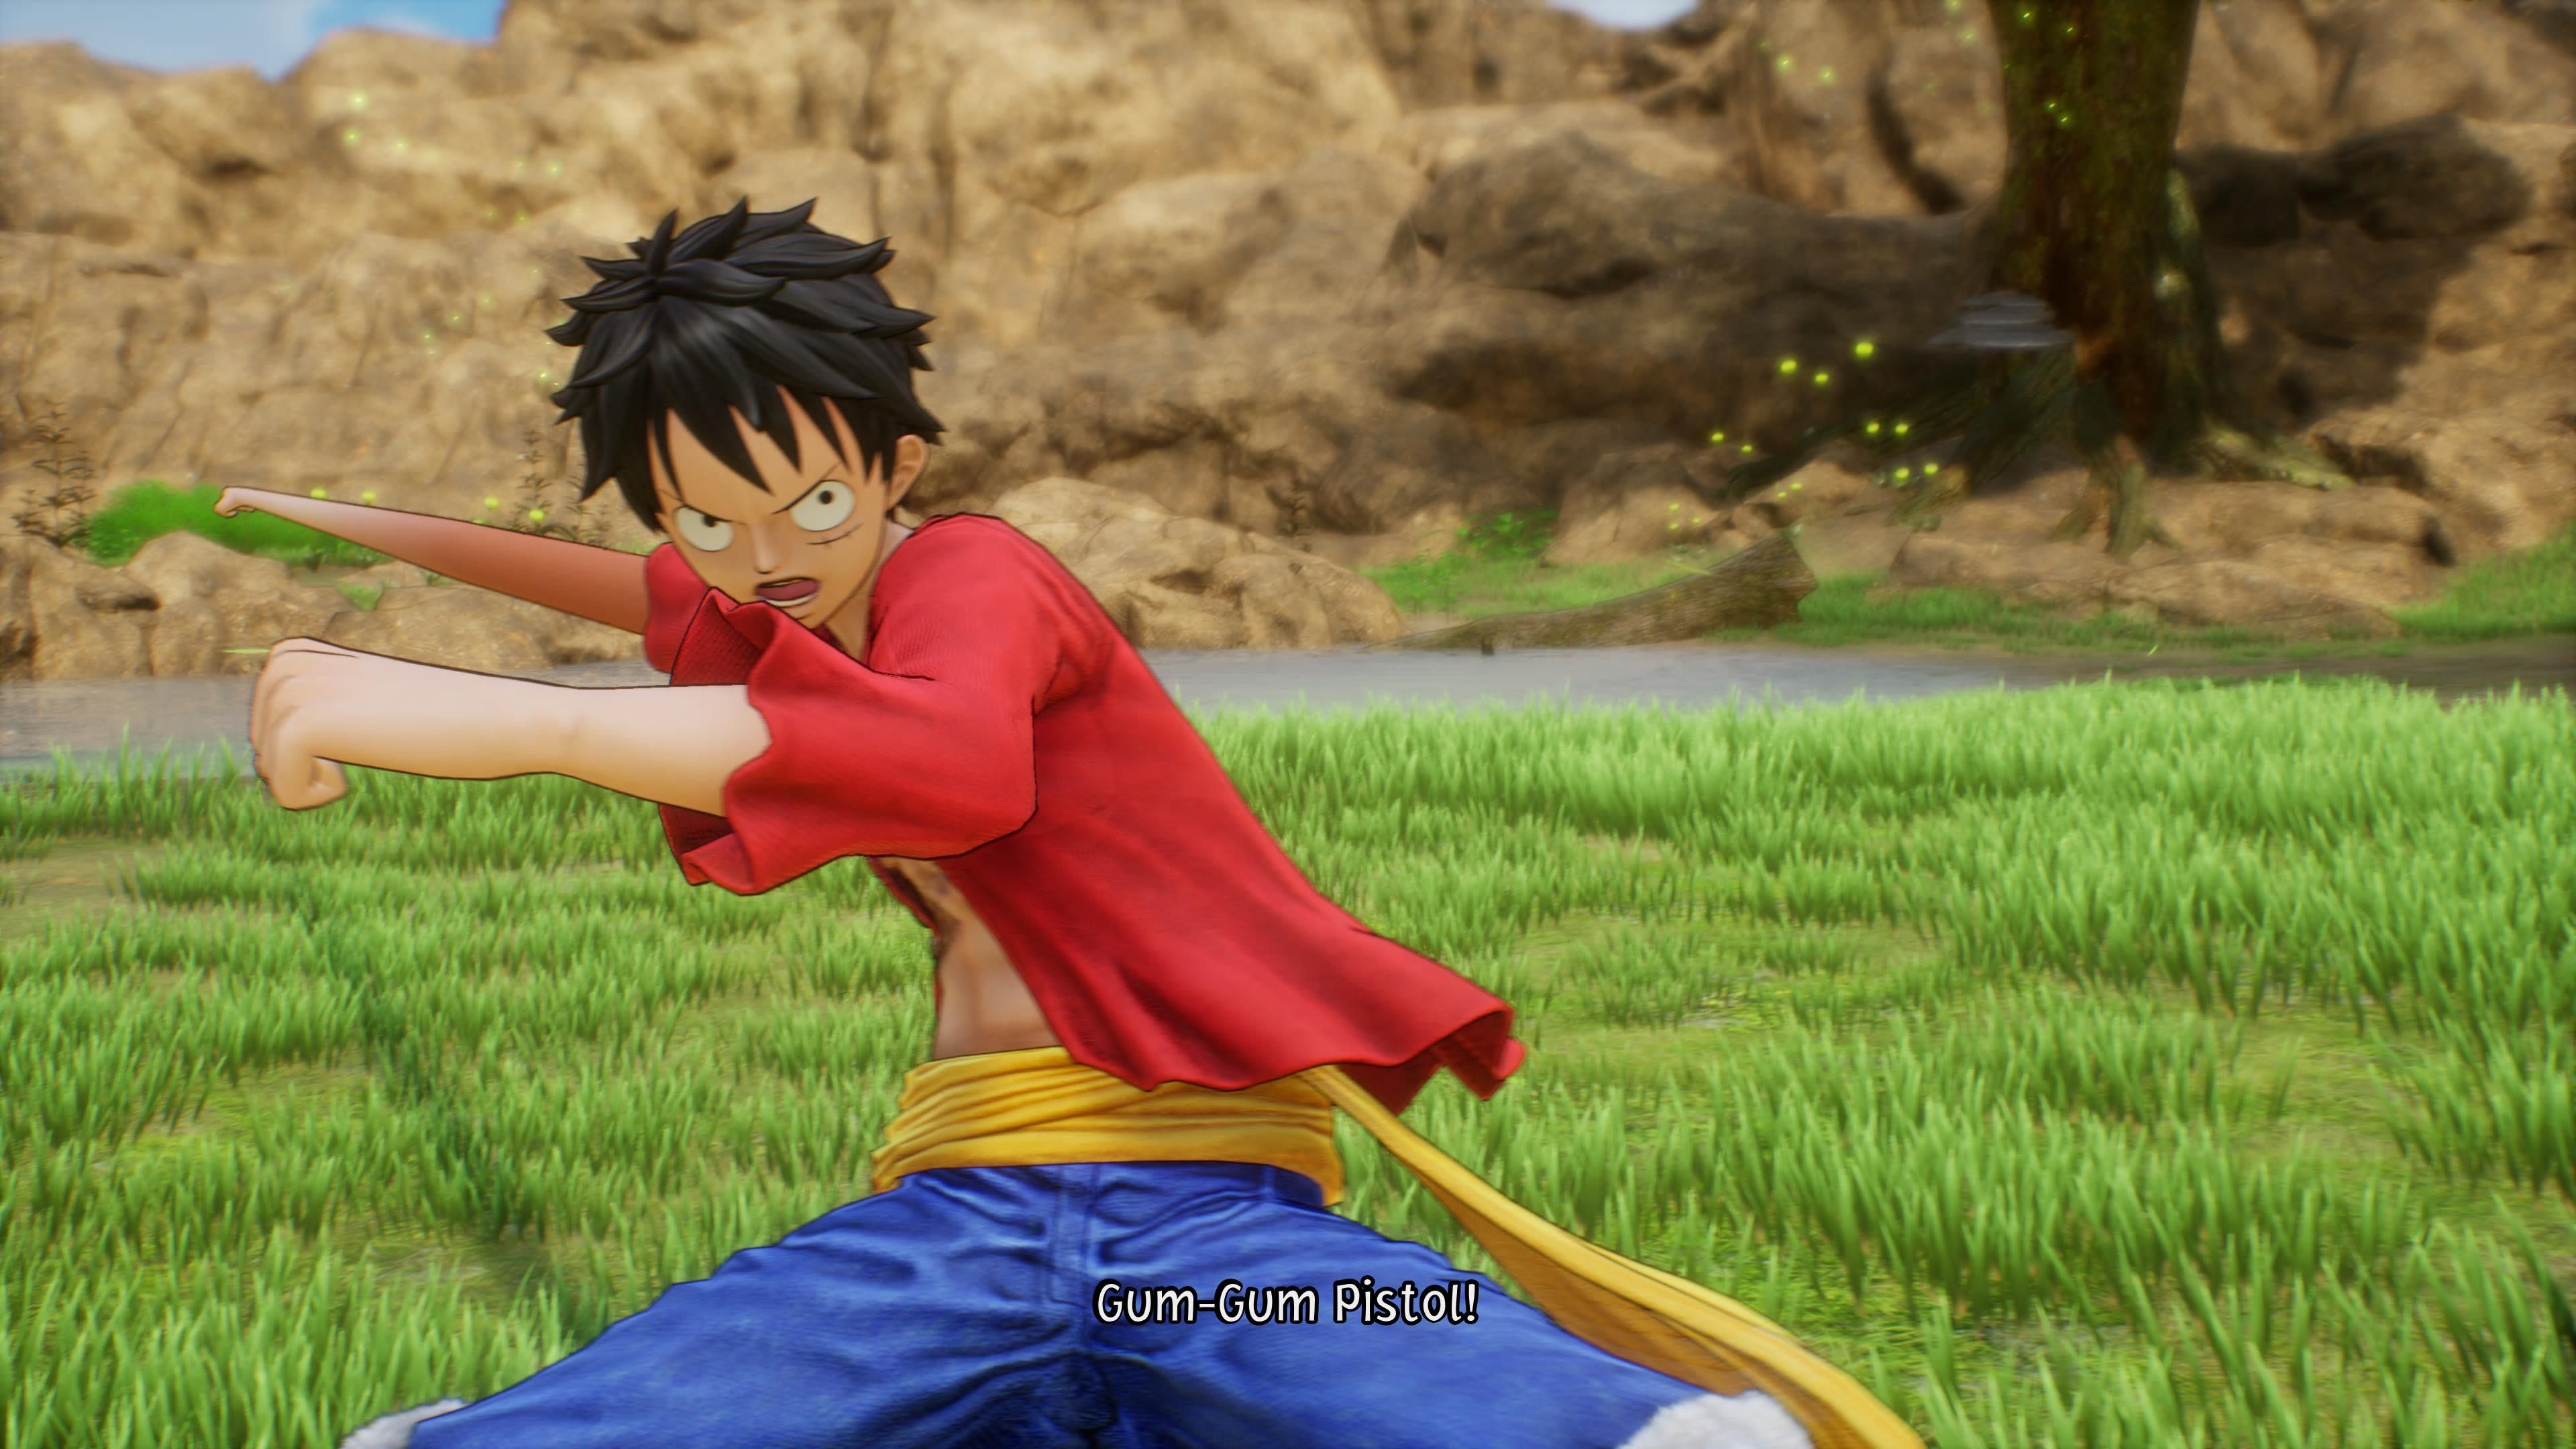 One Piece Odyssey Luffy in fight pose